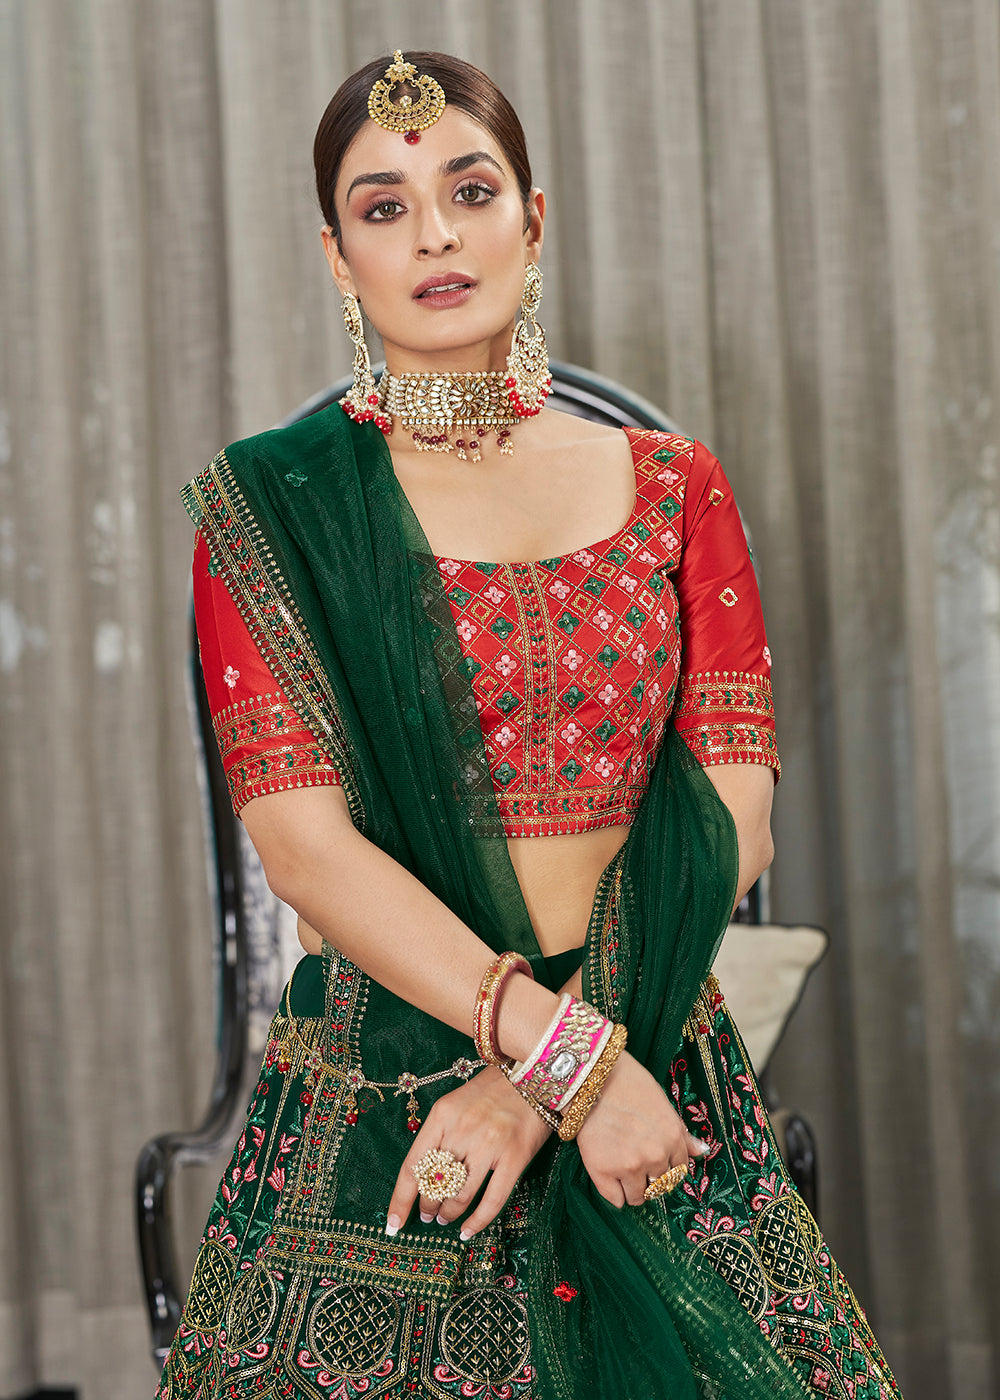 Buy Now Green & Red Multi Sequins & Thread A Line Wedding Lehenga Choli Online in USA, UK, Canada & Worldwide at Empress Clothing.